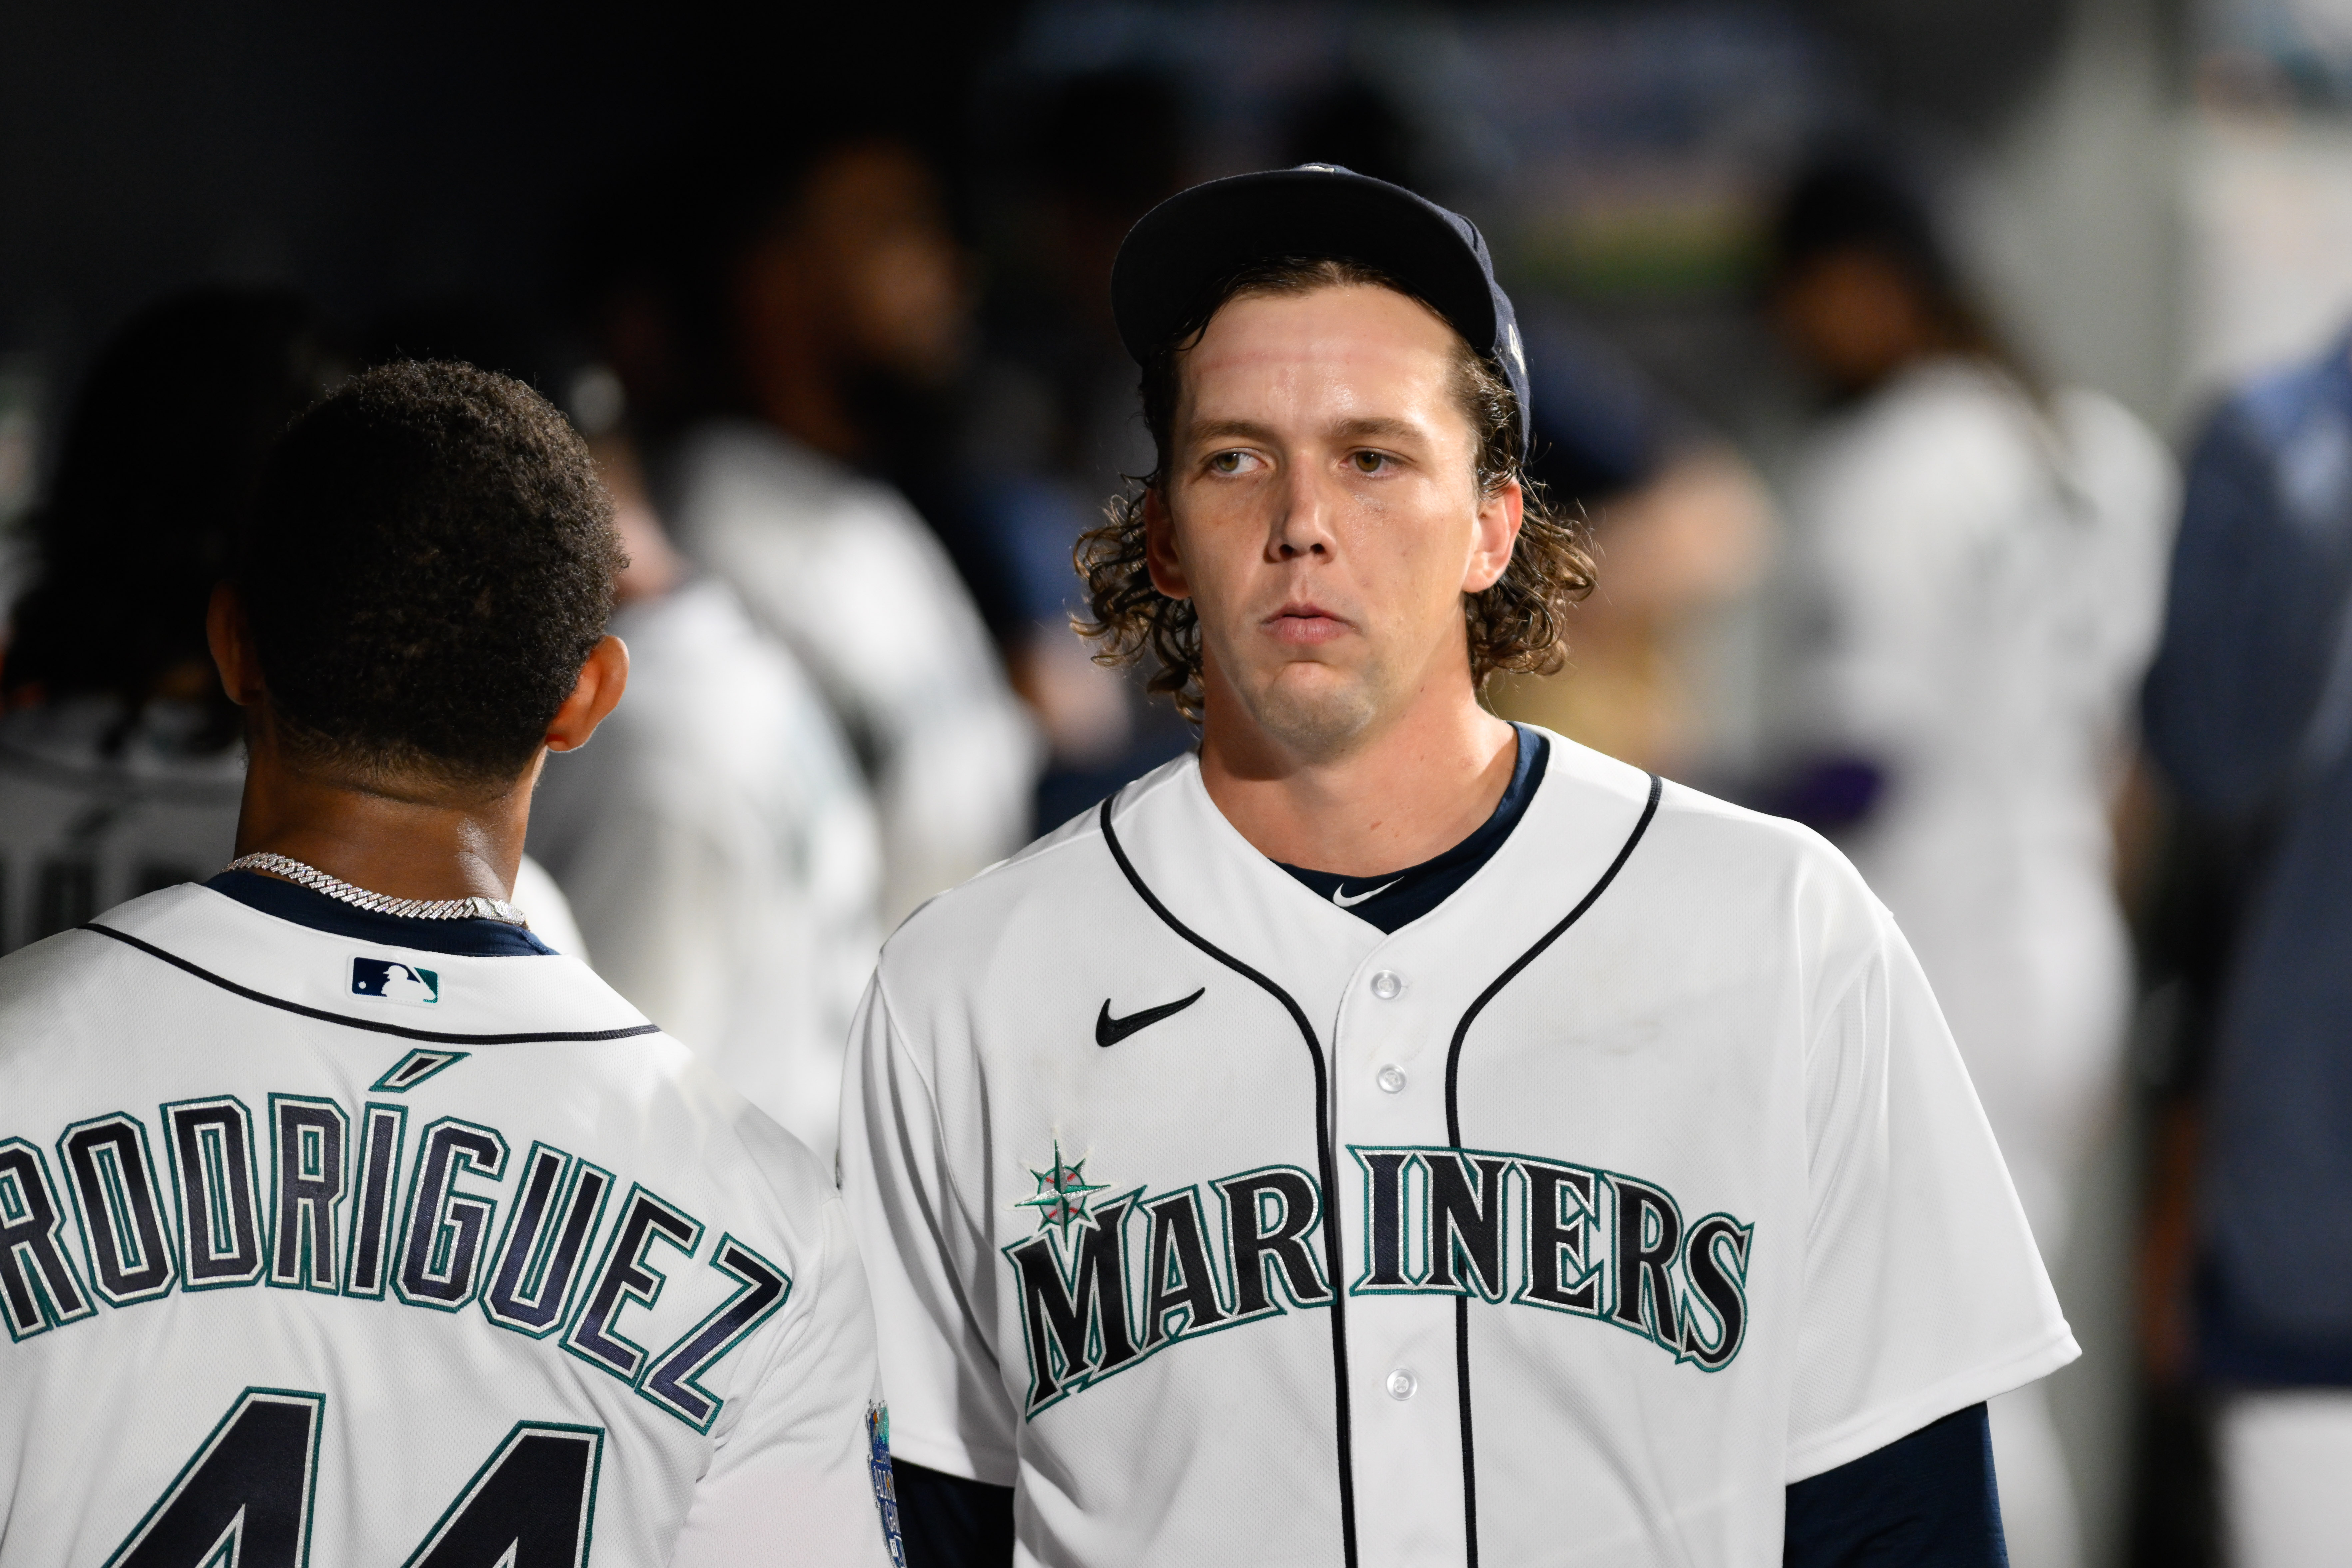 Mariners' playoff push comes up short in loss to Angels; Kyle